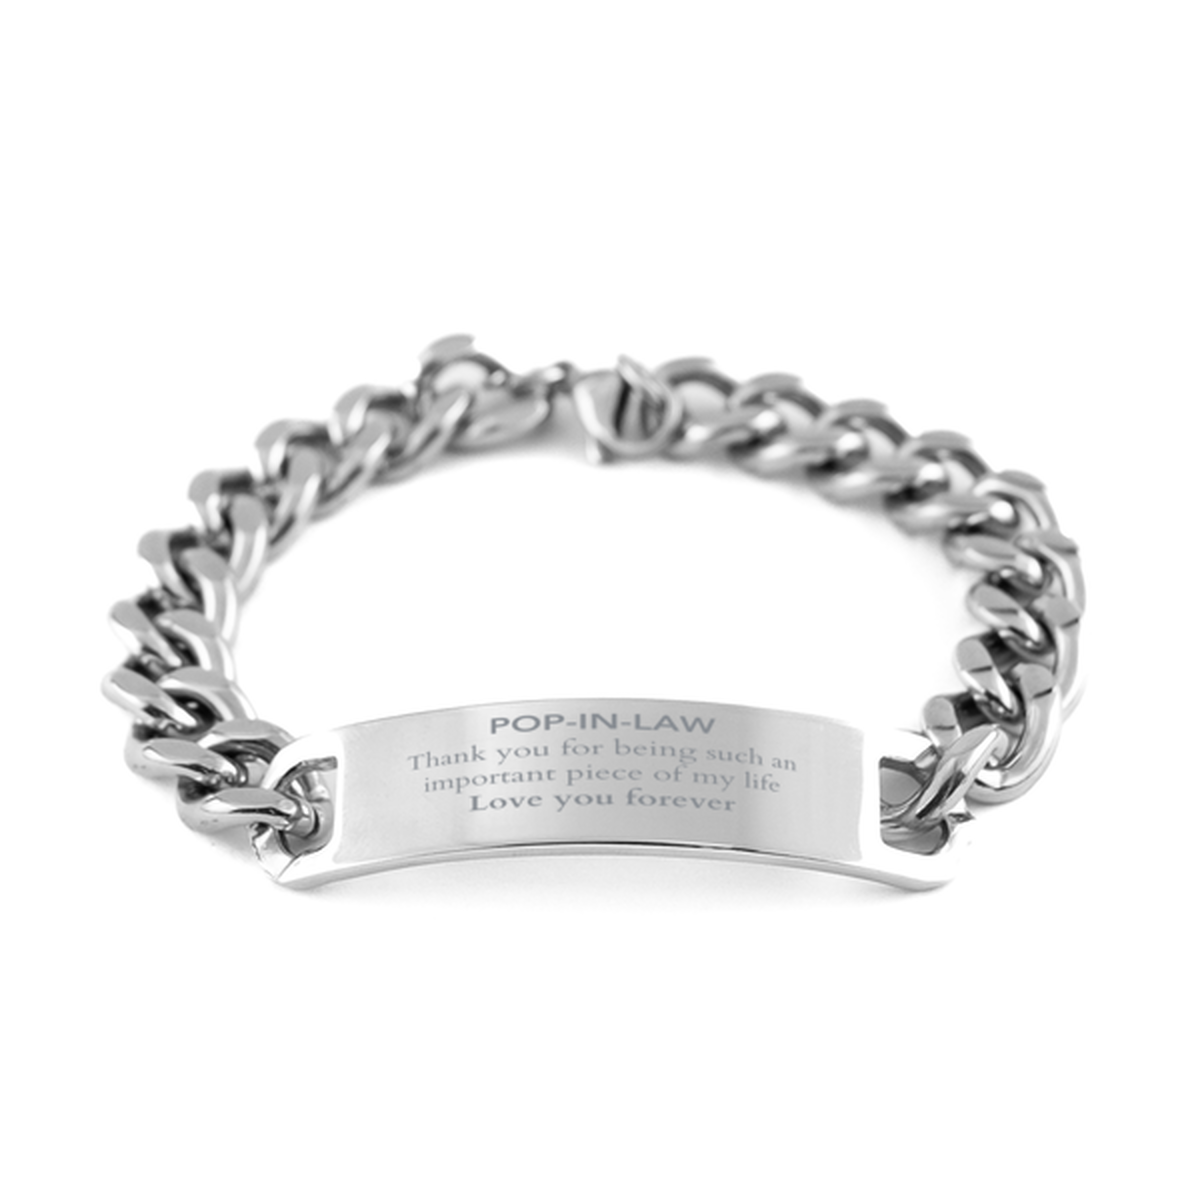 Appropriate Pop-in-law Cuban Chain Stainless Steel Bracelet Epic Birthday Gifts for Pop-in-law Thank you for being such an important piece of my life Pop-in-law Christmas Mothers Fathers Day